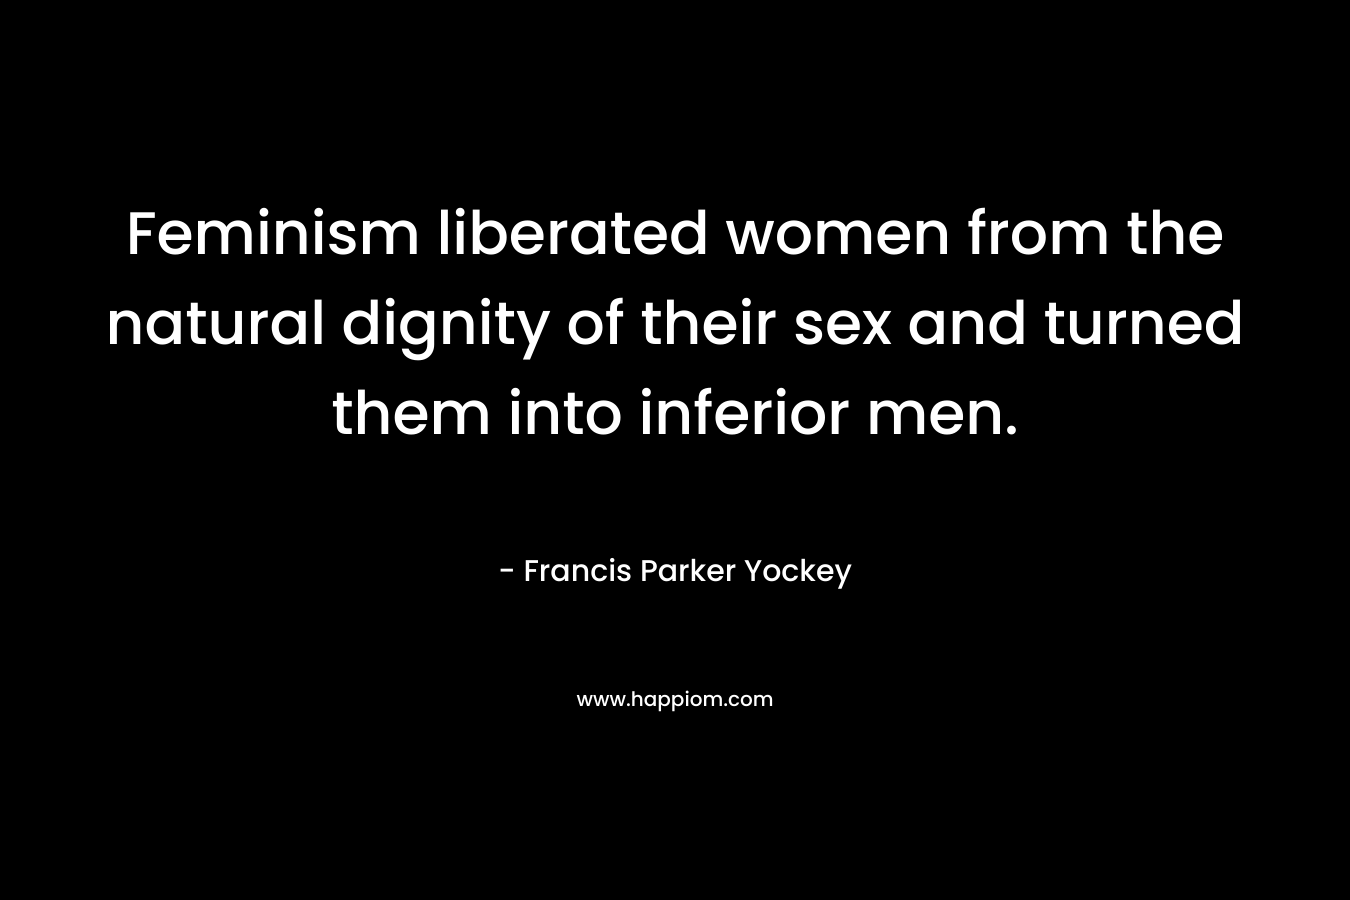 Feminism liberated women from the natural dignity of their sex and turned them into inferior men.